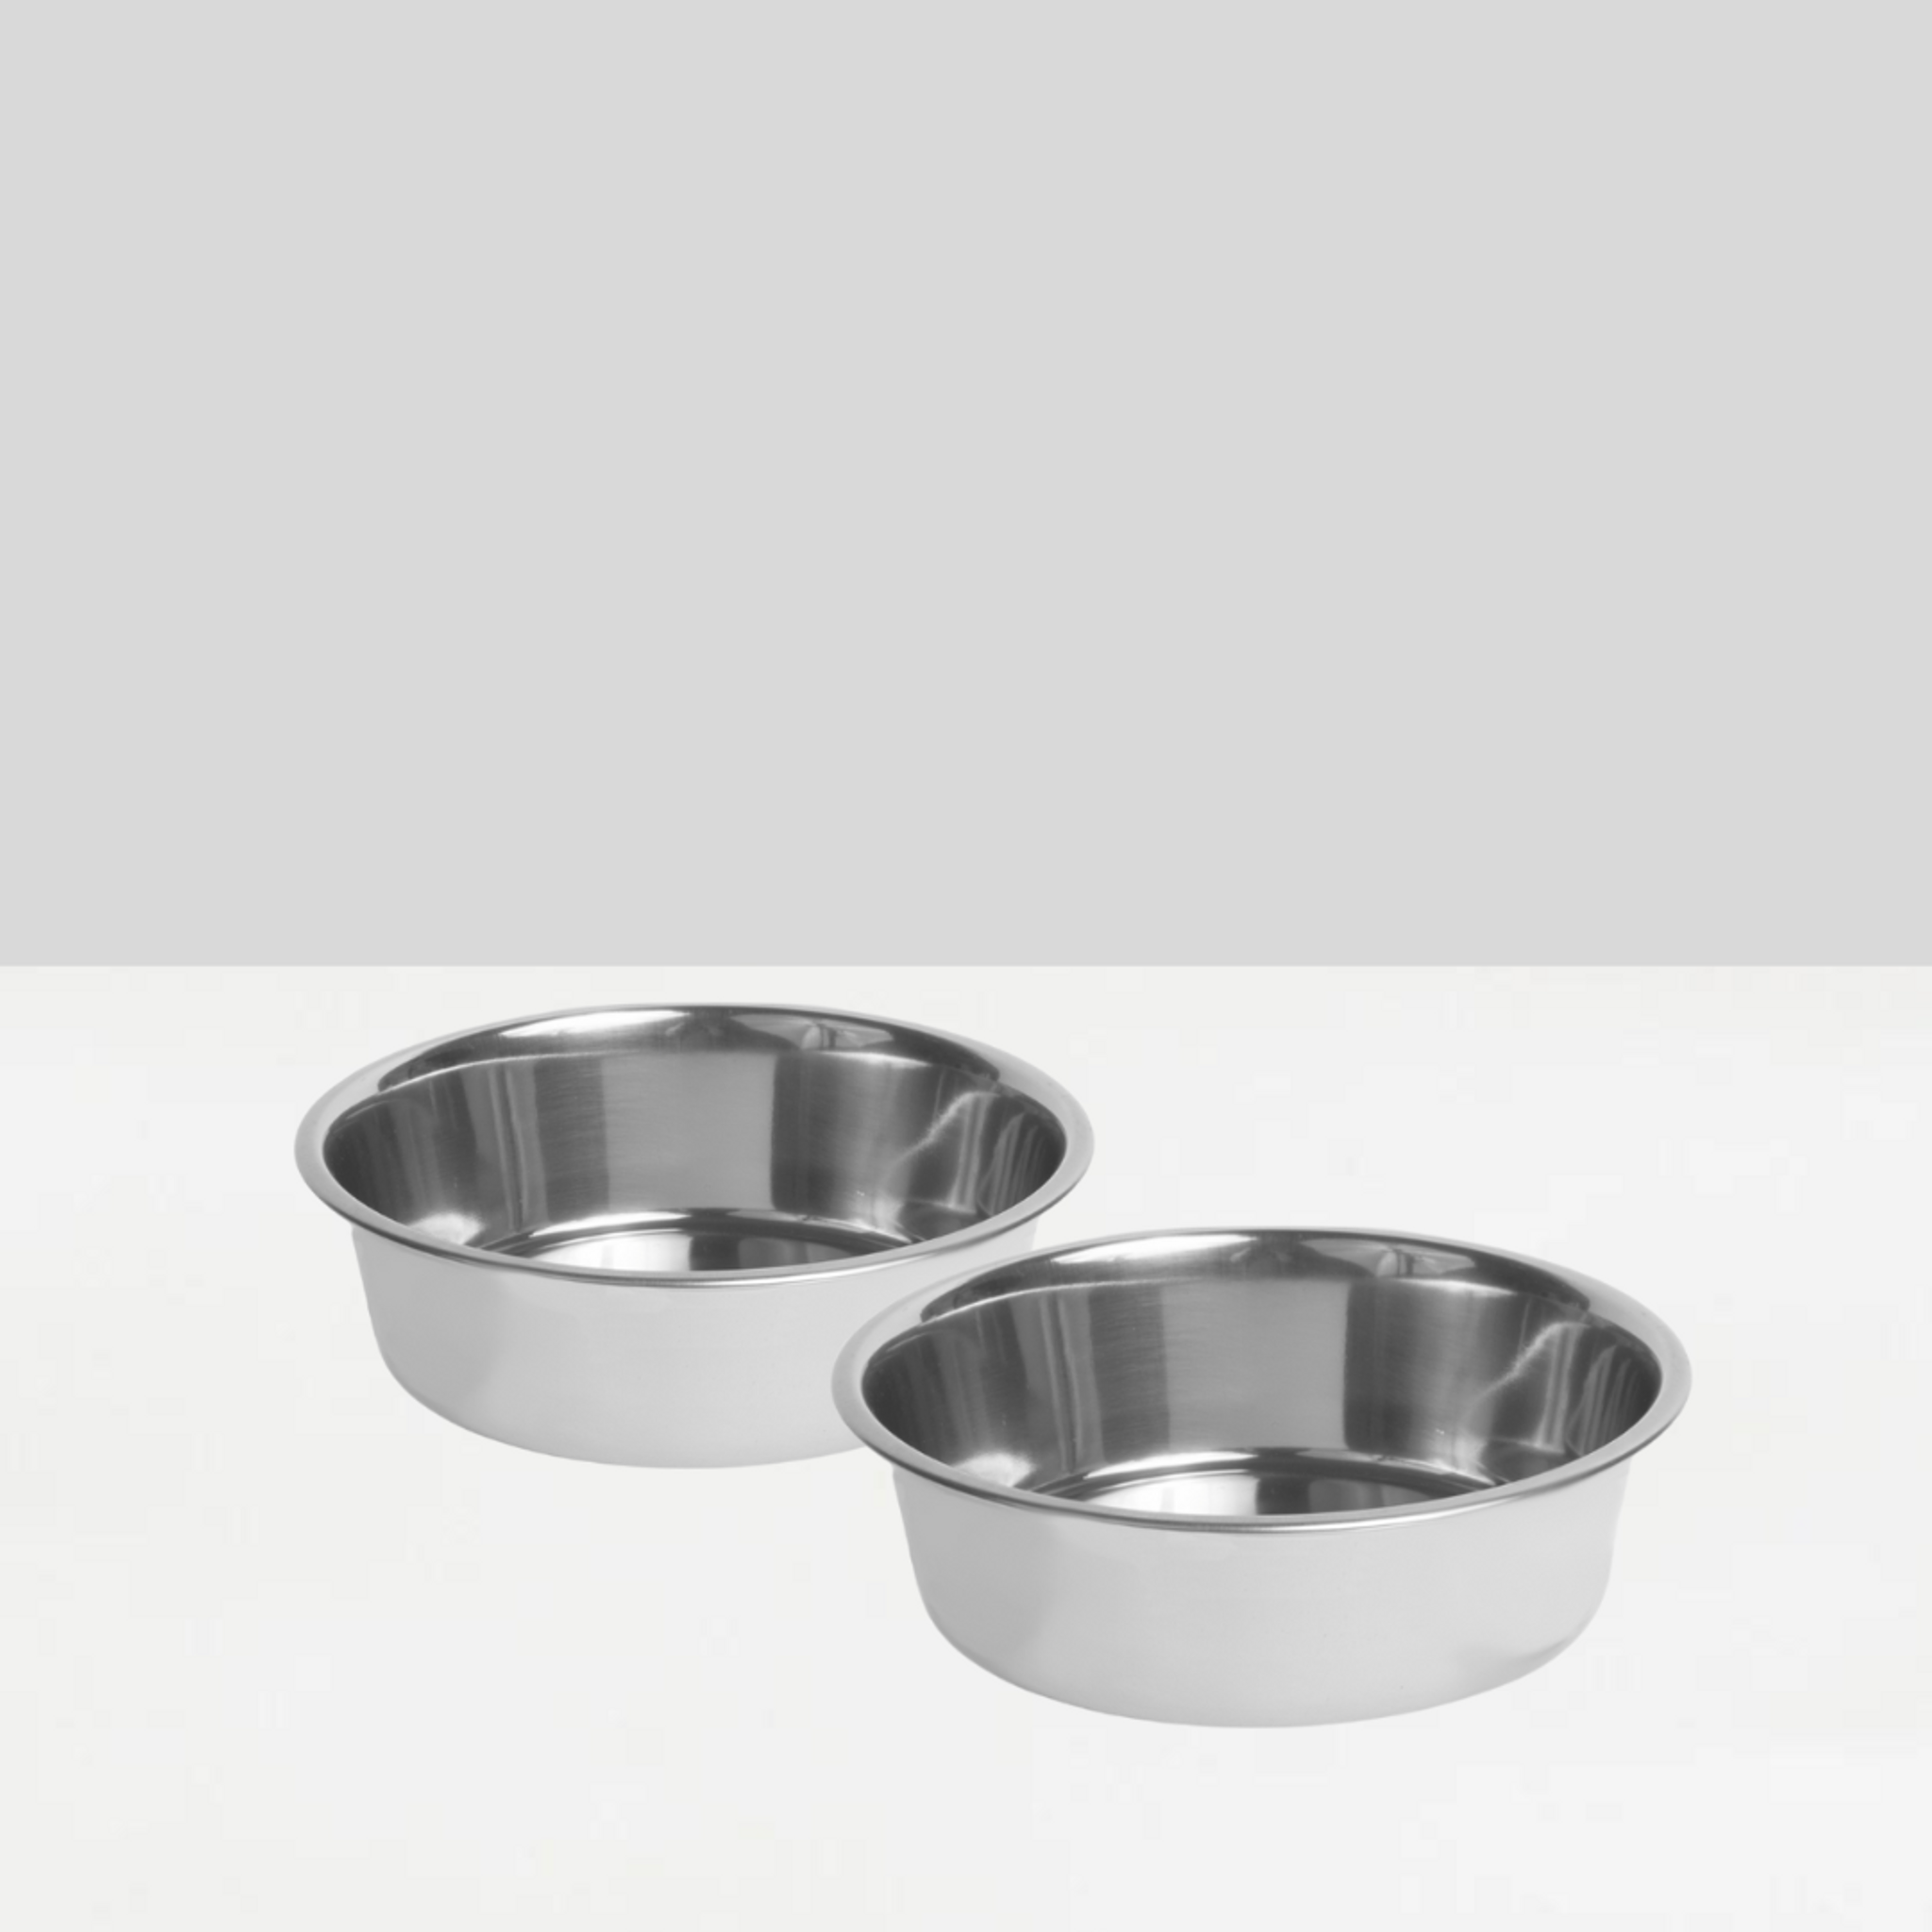 Stainless Steel Pet Bowl, Set of 2 | Options by Hiddin